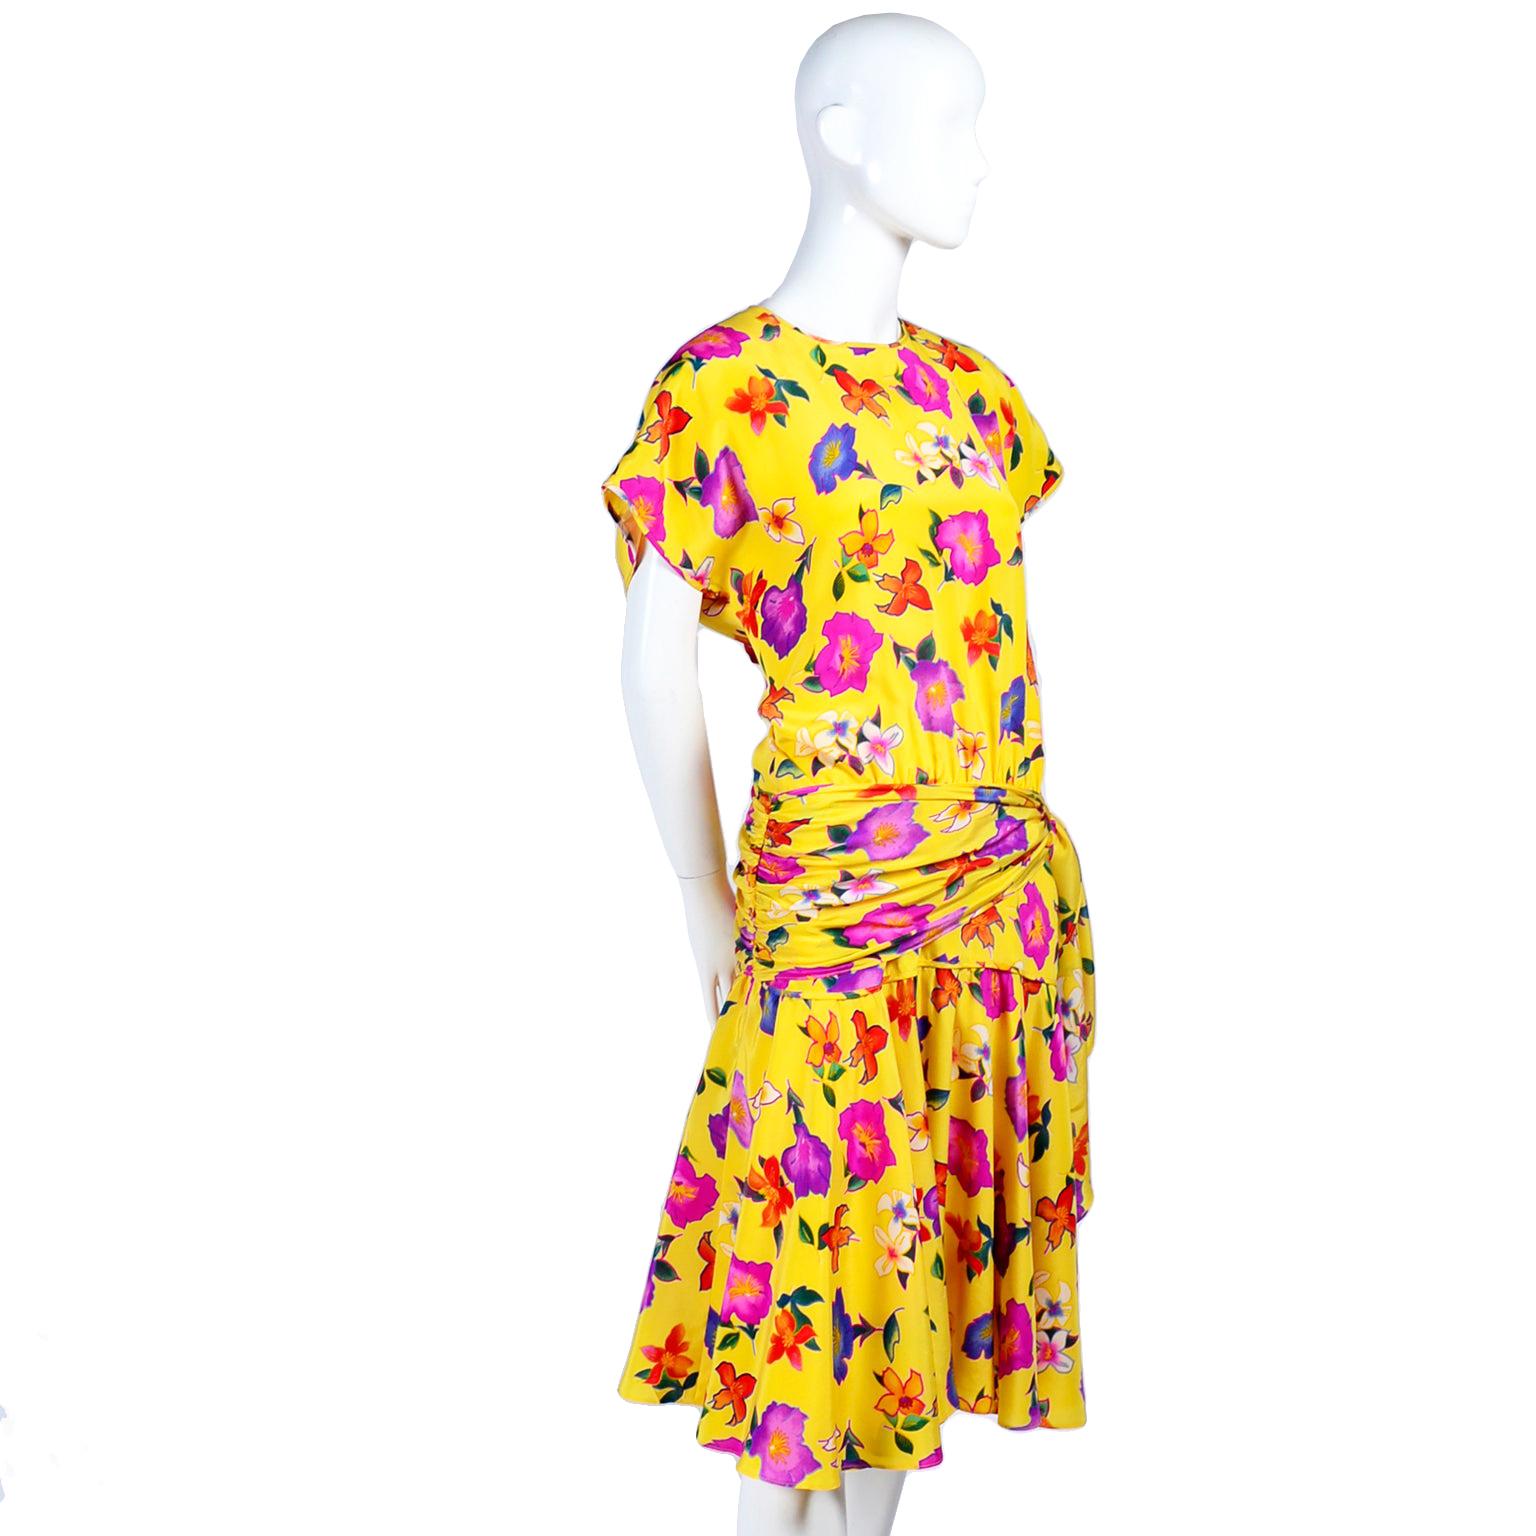 This is such a pretty Escada vintage dress,  in a rich yellow silk print with beautiful tropical flowers in shades of pink, fuchsia, blue, orange and purple. The dress has cap sleeves, a side zipper with buttons above, and buttons up the back. 
We